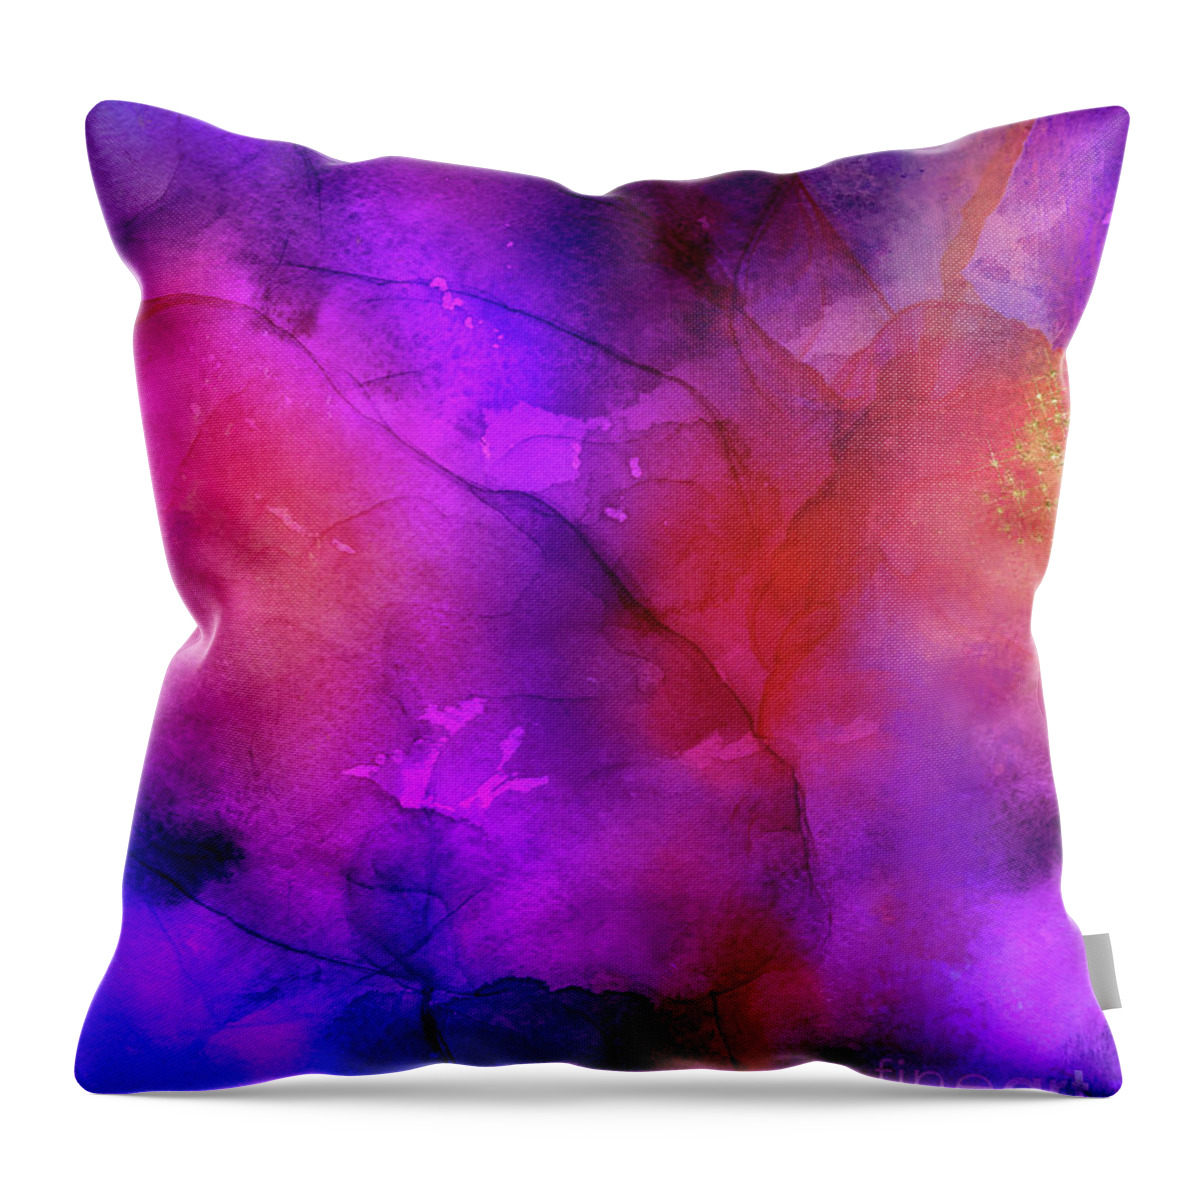 Purple Ink Painting Throw Pillow featuring the painting Purple, Blue, Red And Pink Fluid Ink Abstract Art Painting by Modern Art